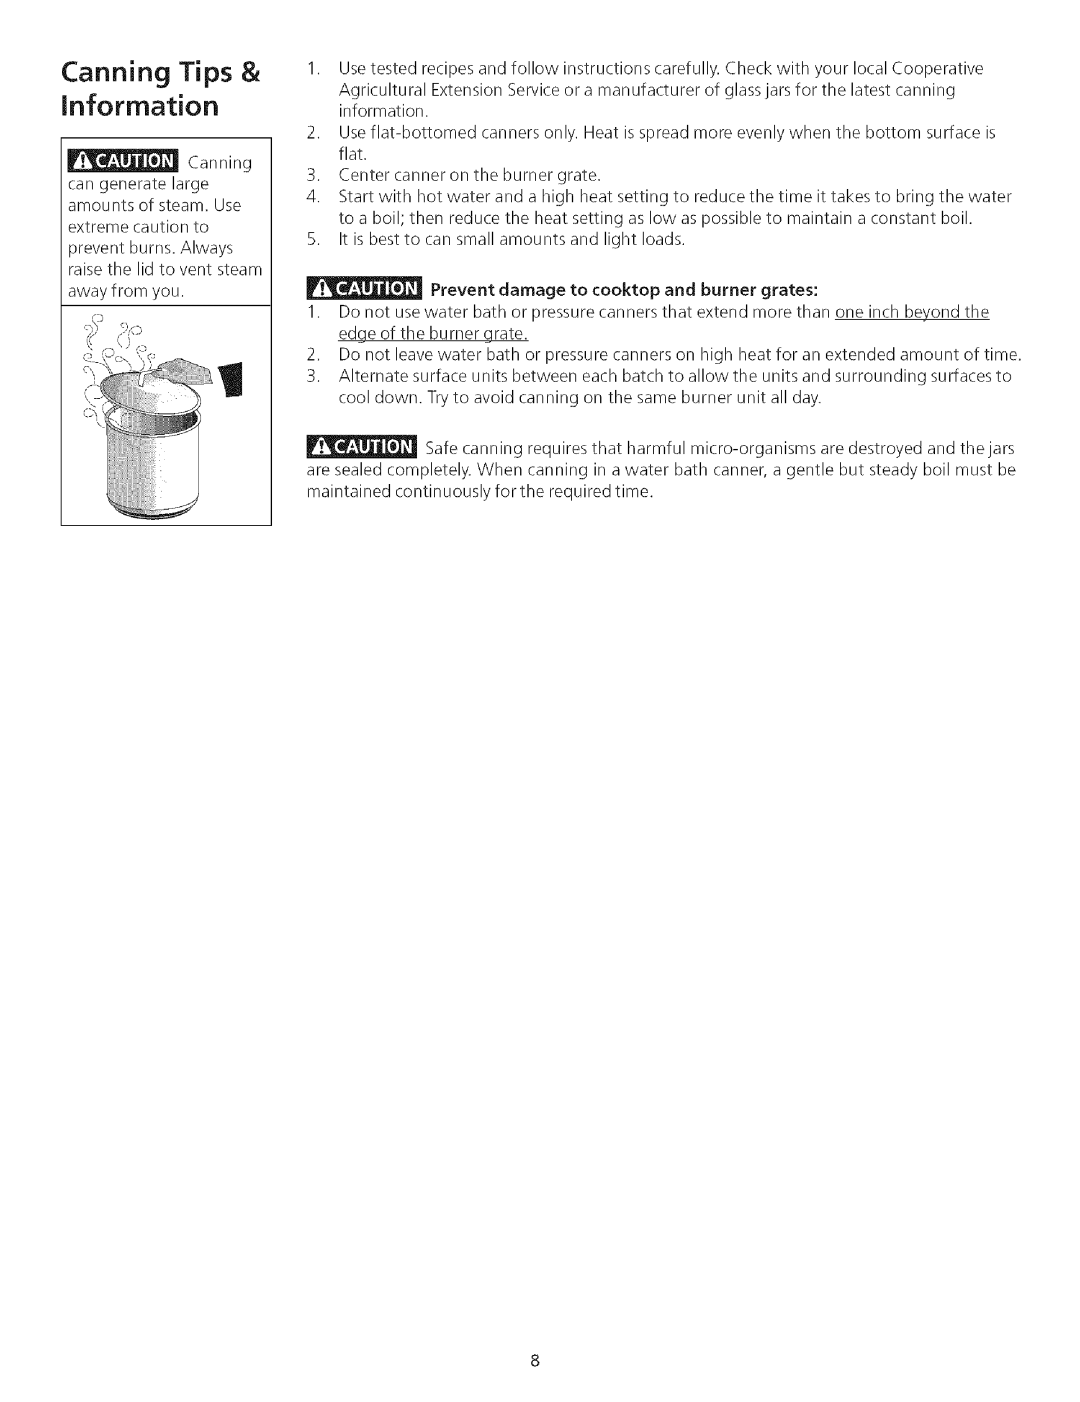 Kenmore 790.75503 manual Canning Tips & Information 